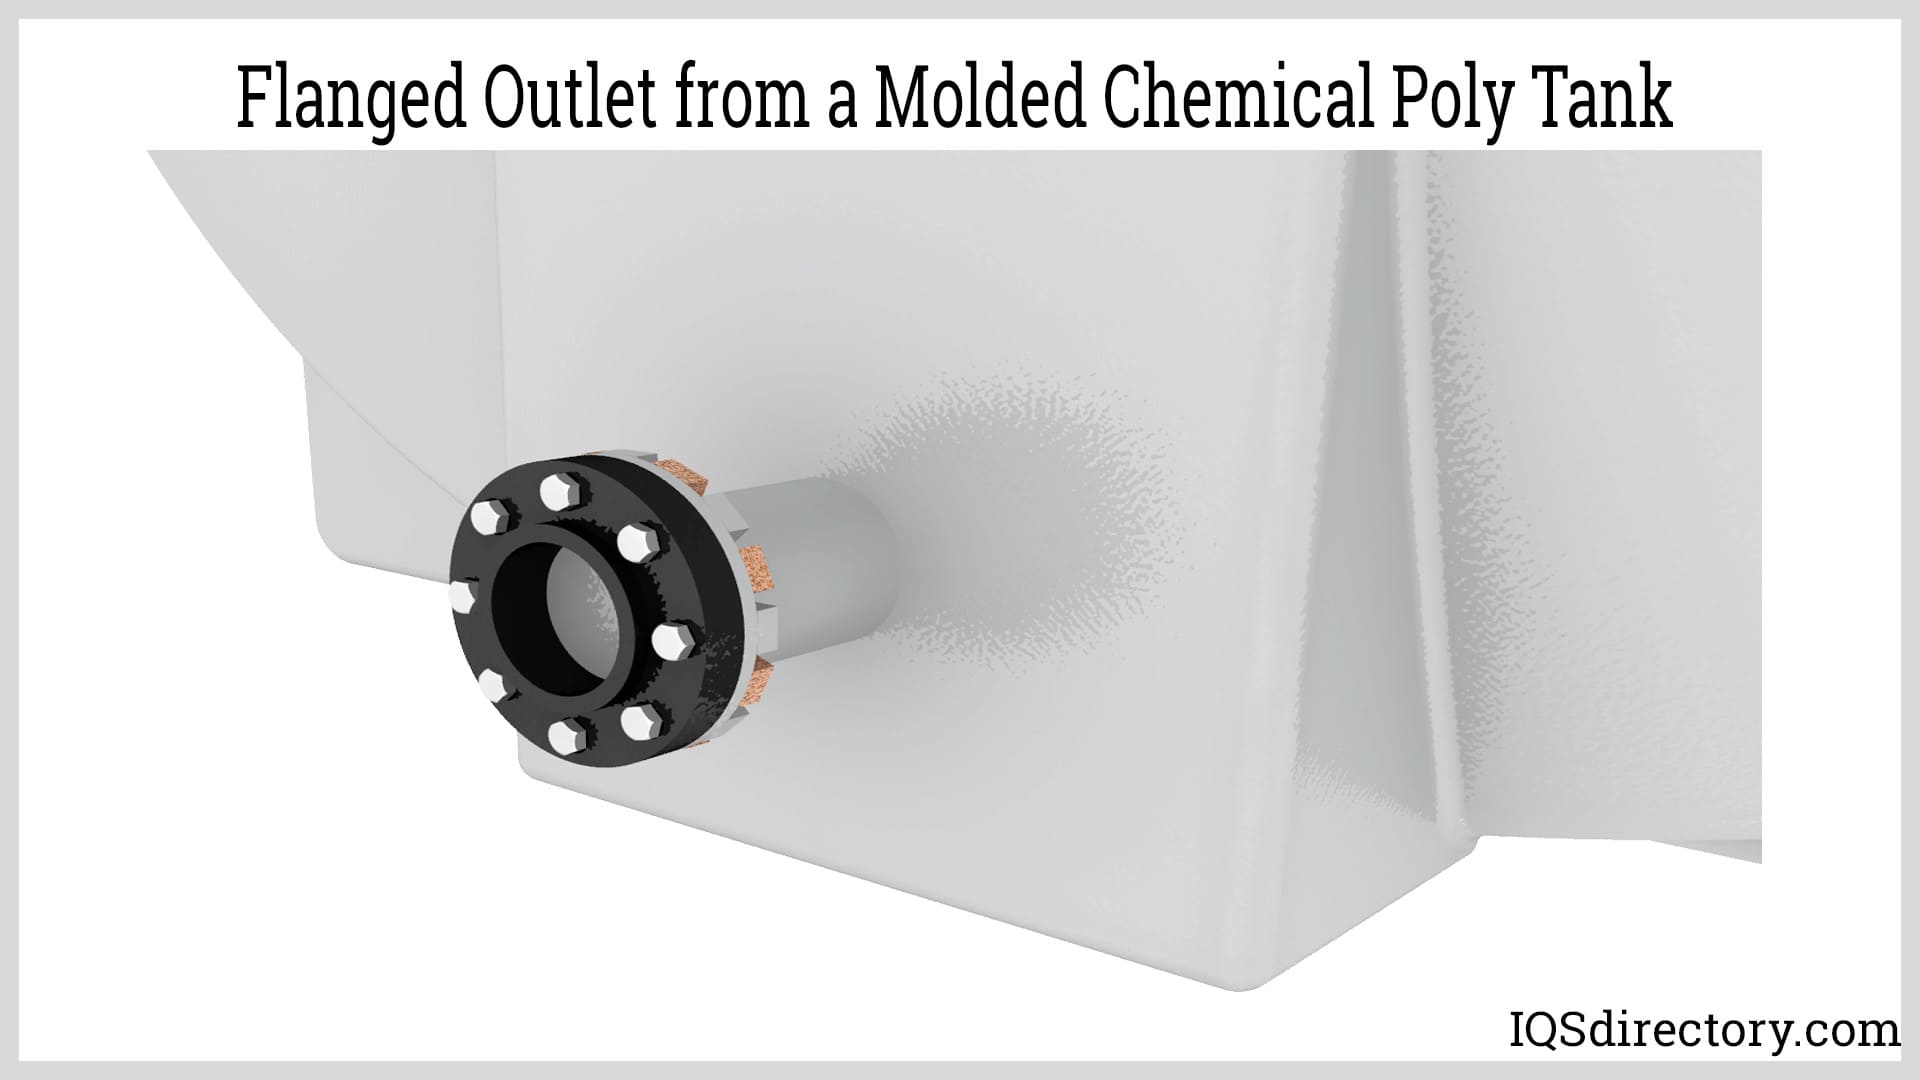 Flanged Outlet from a Molded Chemical Poly Tank